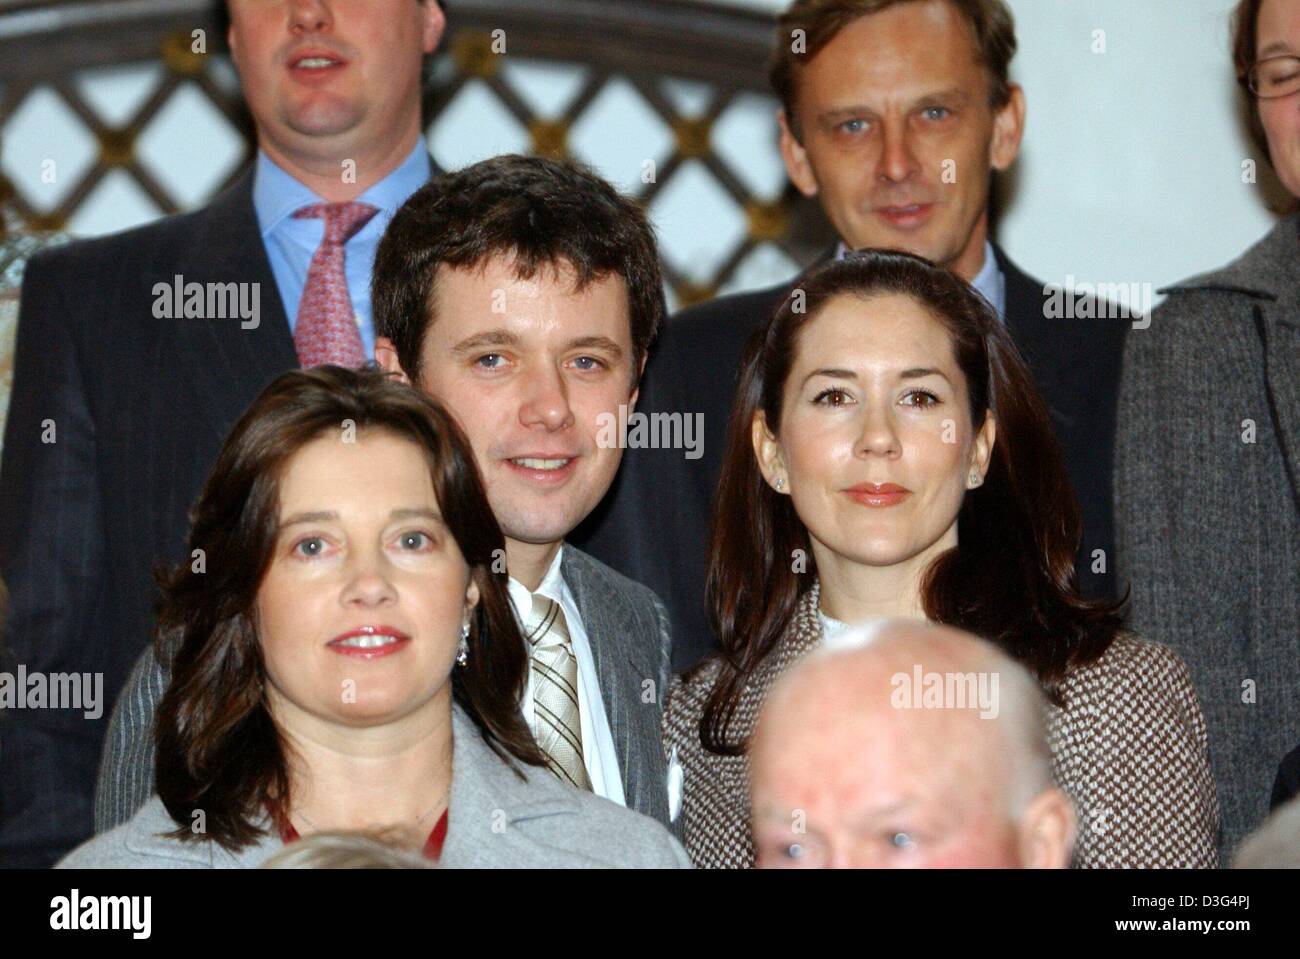 (dpa) - Crown Prince Frederik of Denmark and his fiancee Mary Donaldson pose for a group photo after the baptism of Countess Ingrid at Berleburg Castle in Bad Berleburg, Germany, 13 December 2003. On the left Princess Alexia of Greece. The baby was born on 16 August 2003 in Copenhagen and was given the name Countess Ingrid Alexandra Irma Astrid Benedikte von Pfeil and Klein-Ellguth Stock Photo